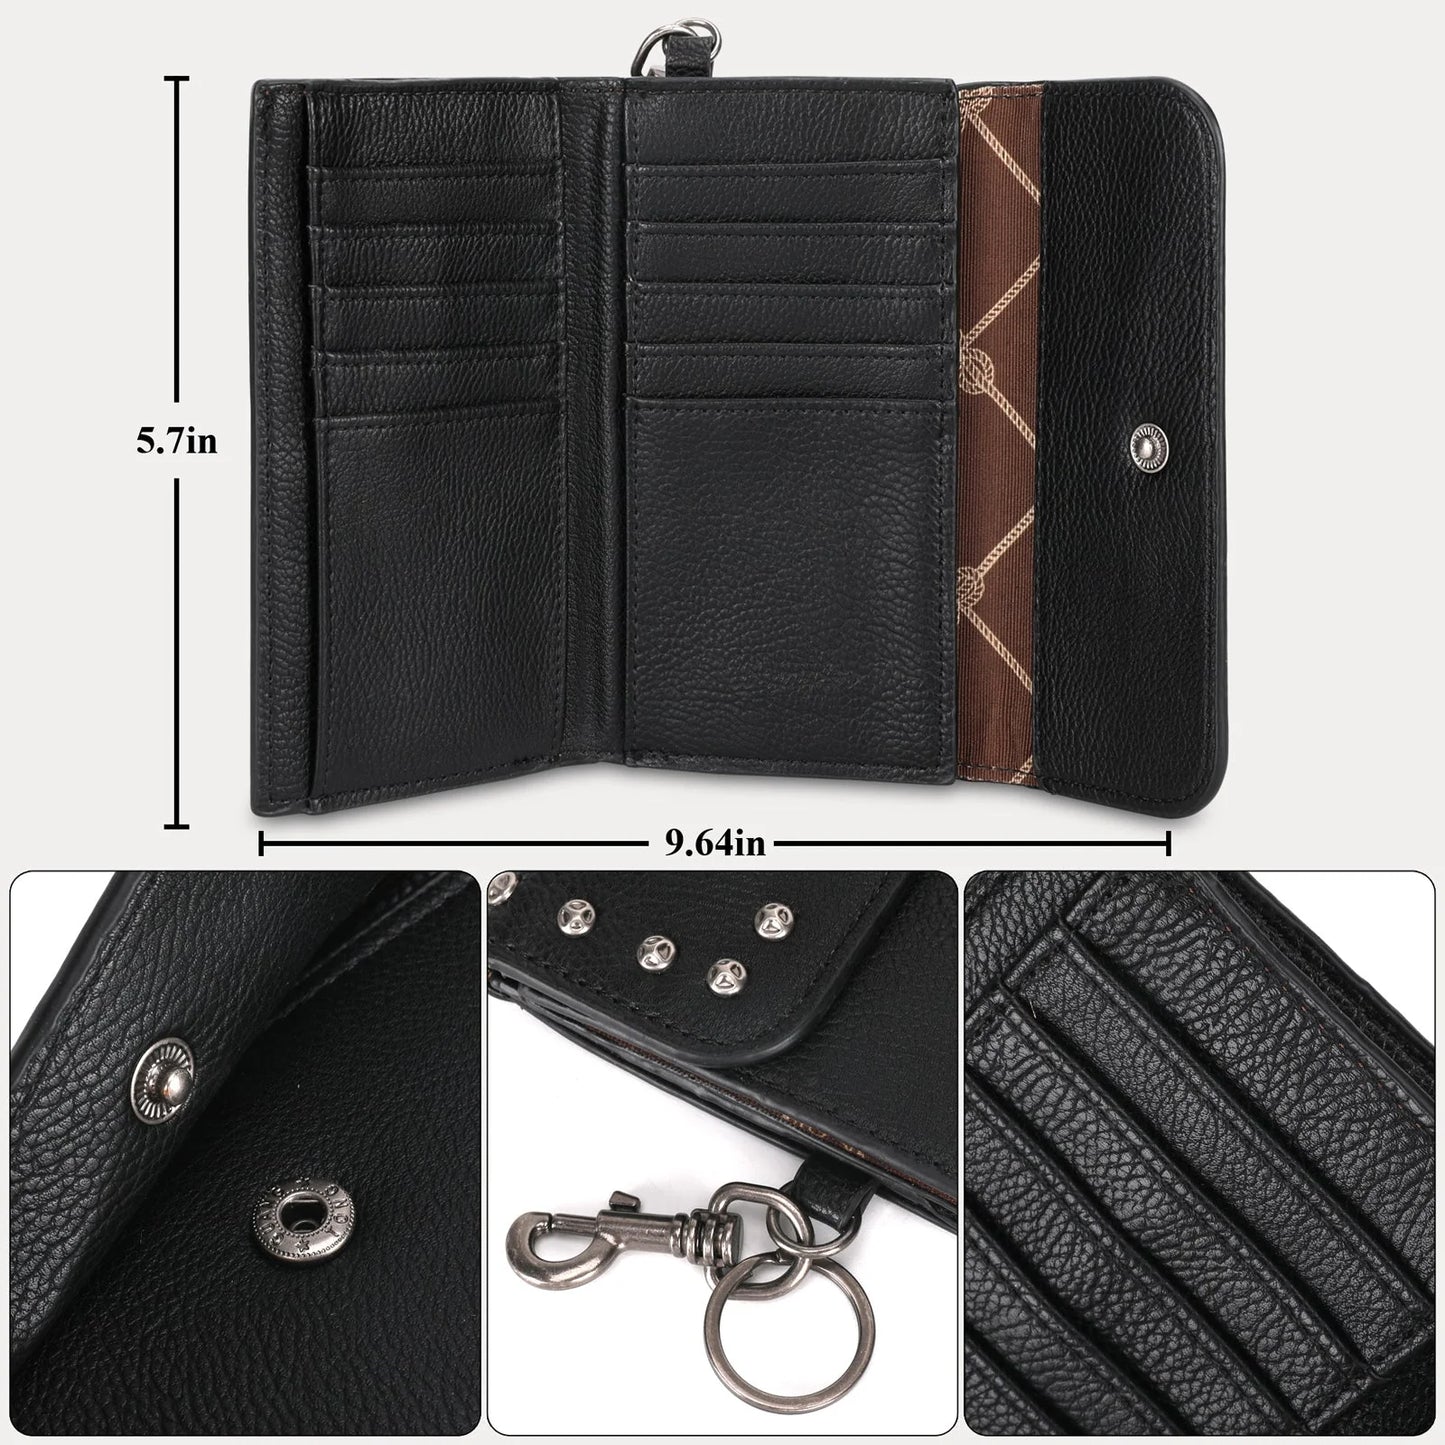 WG64W001 - Wrangler Studded Accents Tri-fold Key-Chain Wallet - Brown